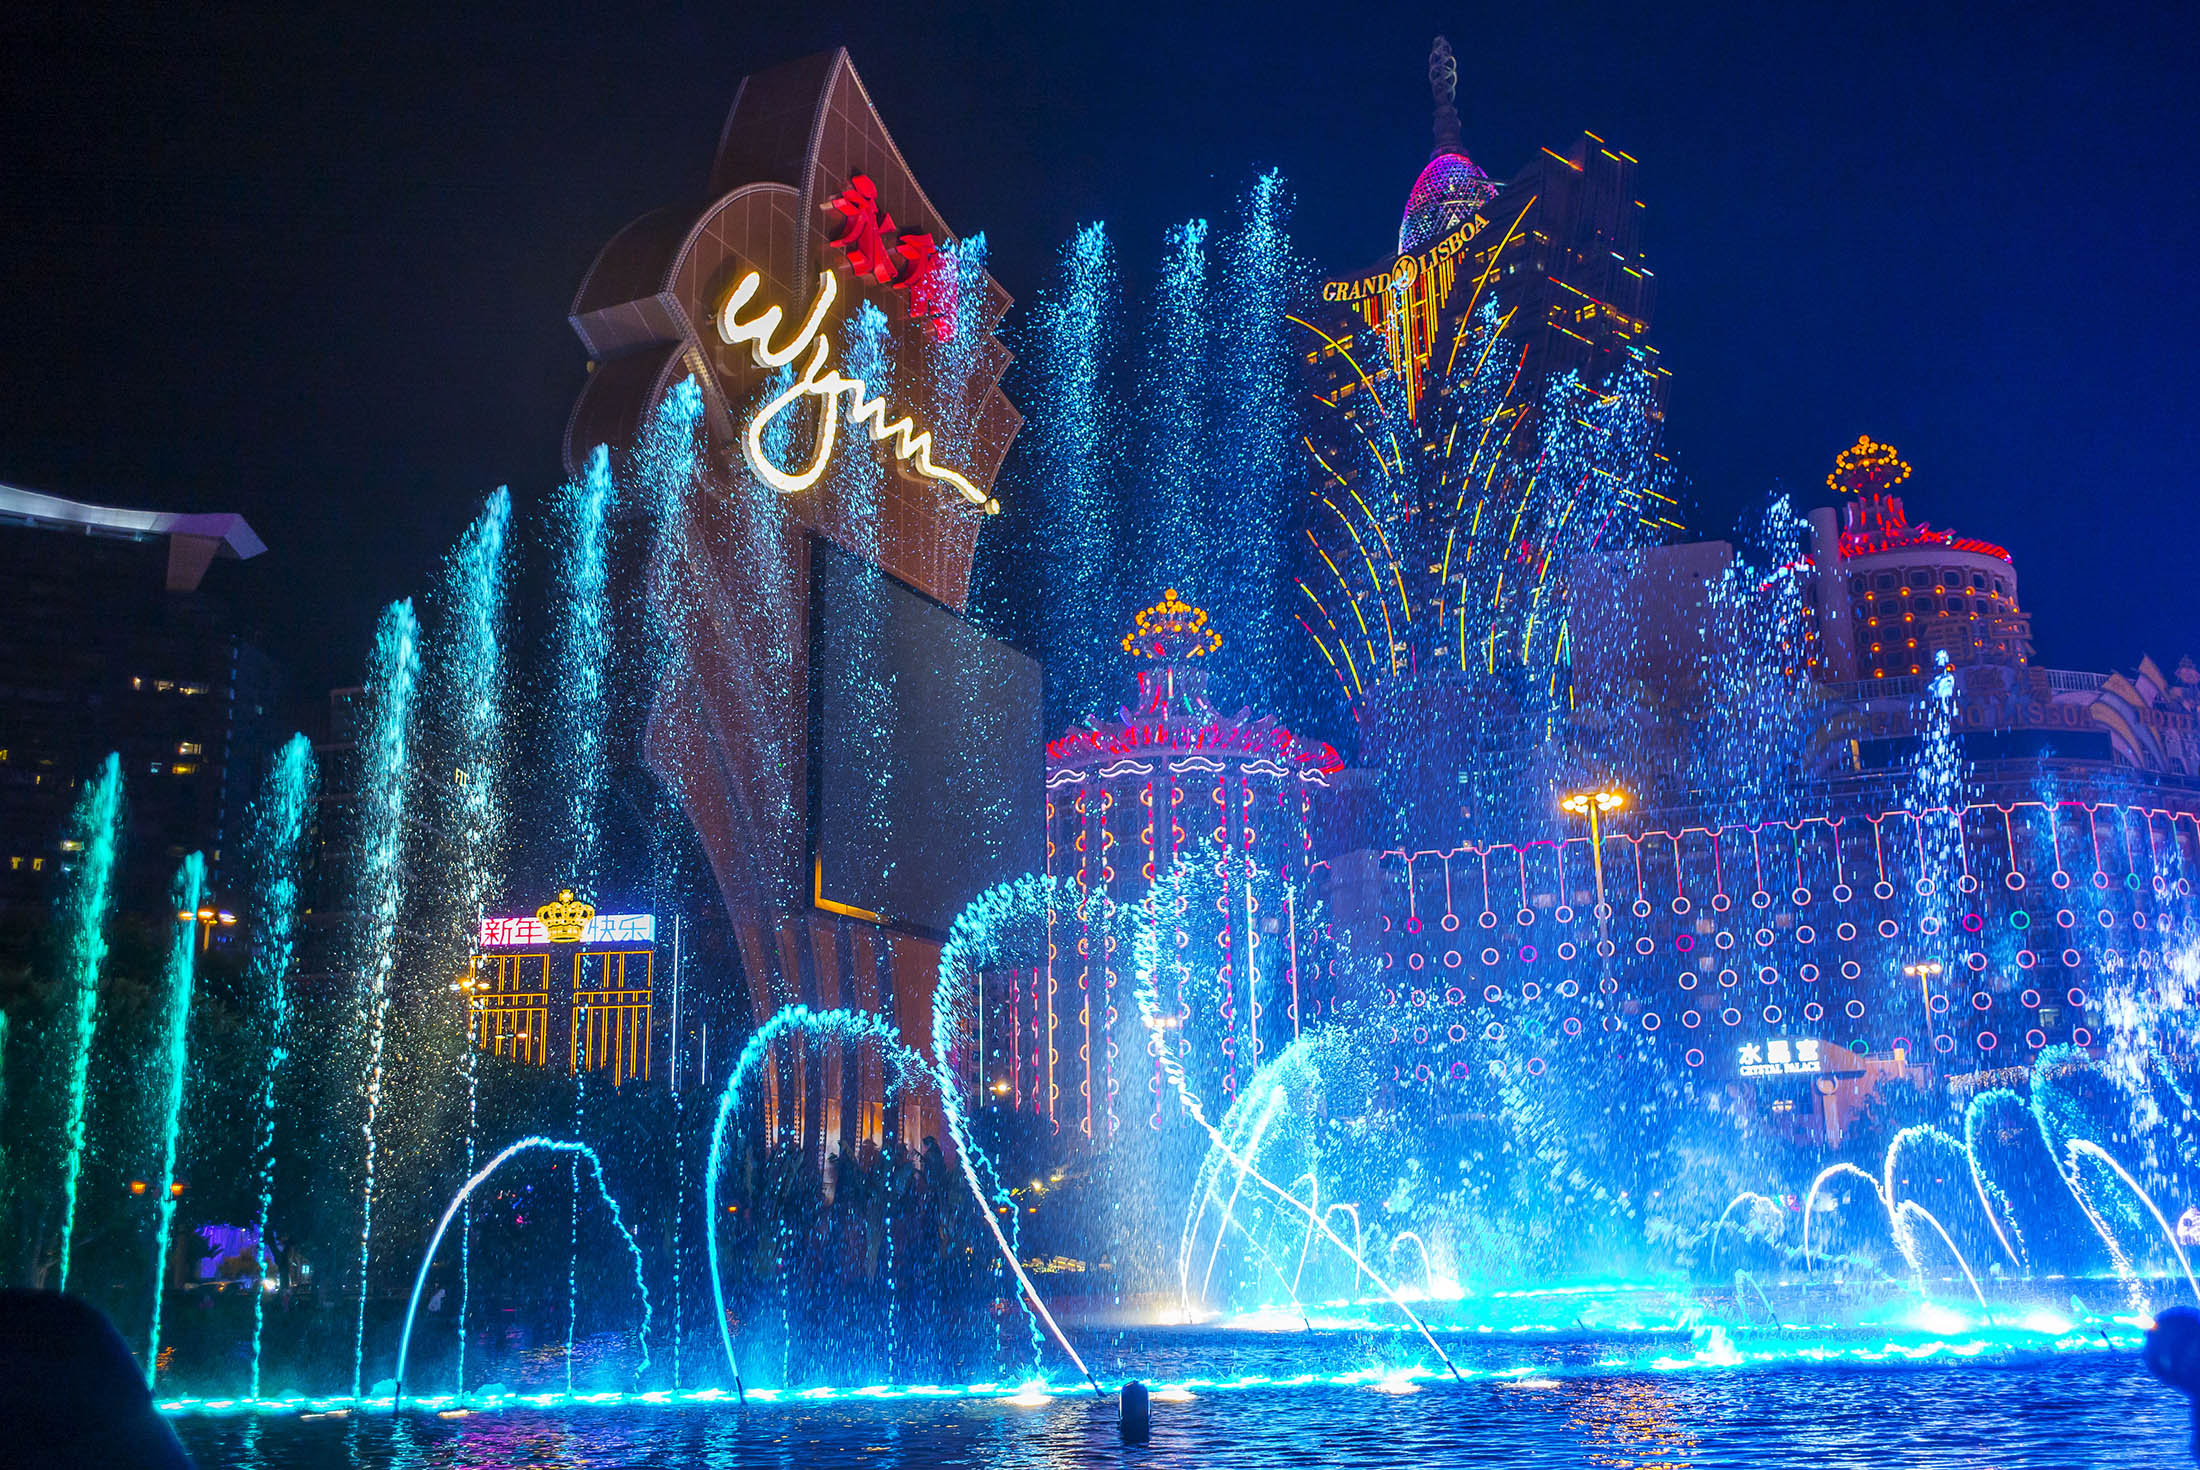 Water from a fountain sprays into the air in front of the Wynn Macau casino resort.
